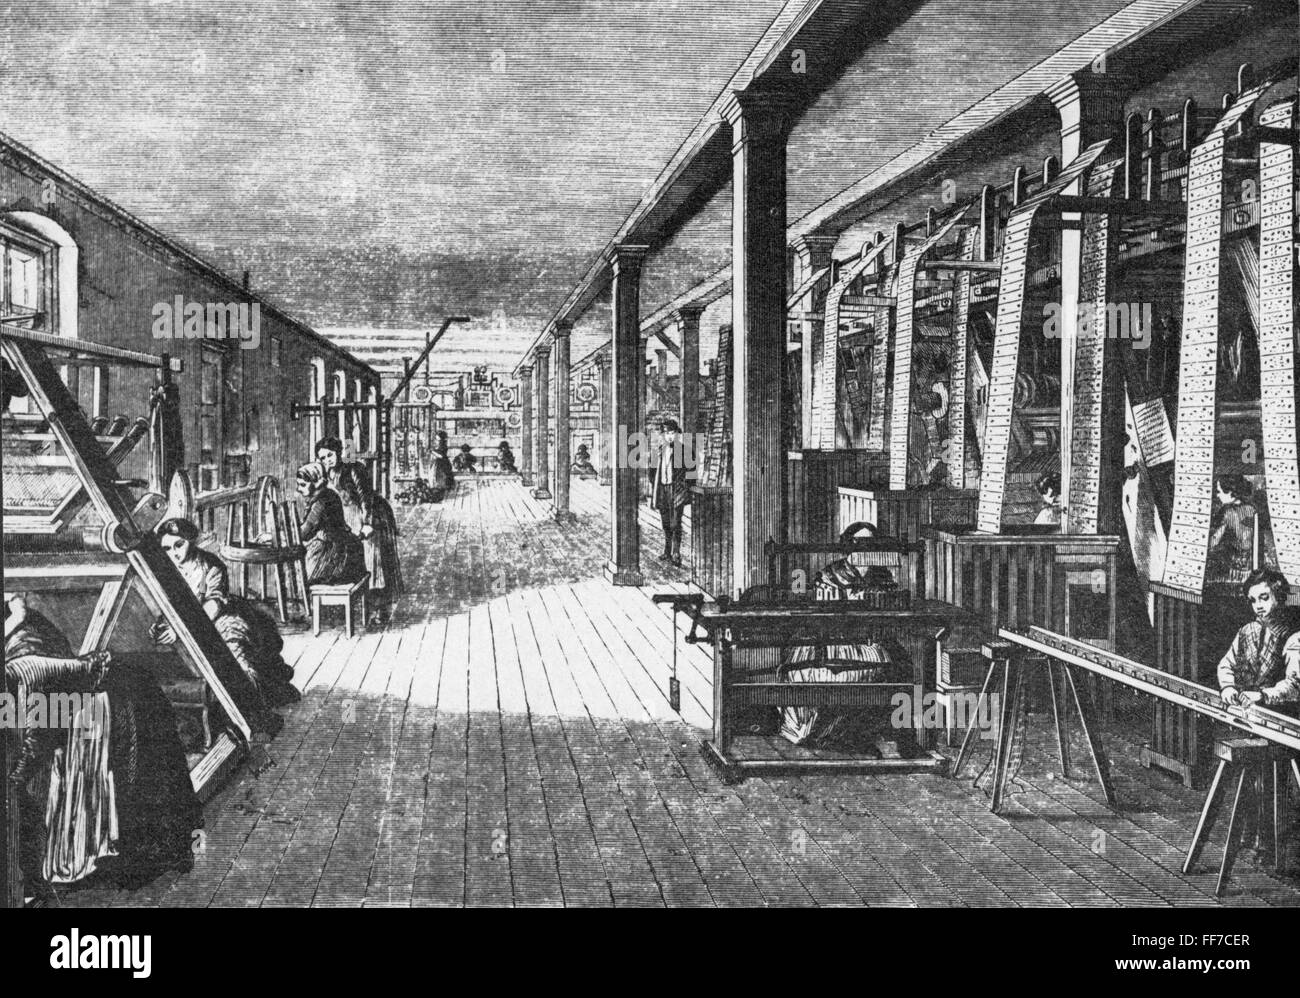 industry, textiles, carpets, production with the help of punch cards, system by Joseph-Marie Jacquard, Gevers & Schmidt company, Schmiedeberg, Silesia, wood engraving, 1858, Additional-Rights-Clearences-Not Available Stock Photo